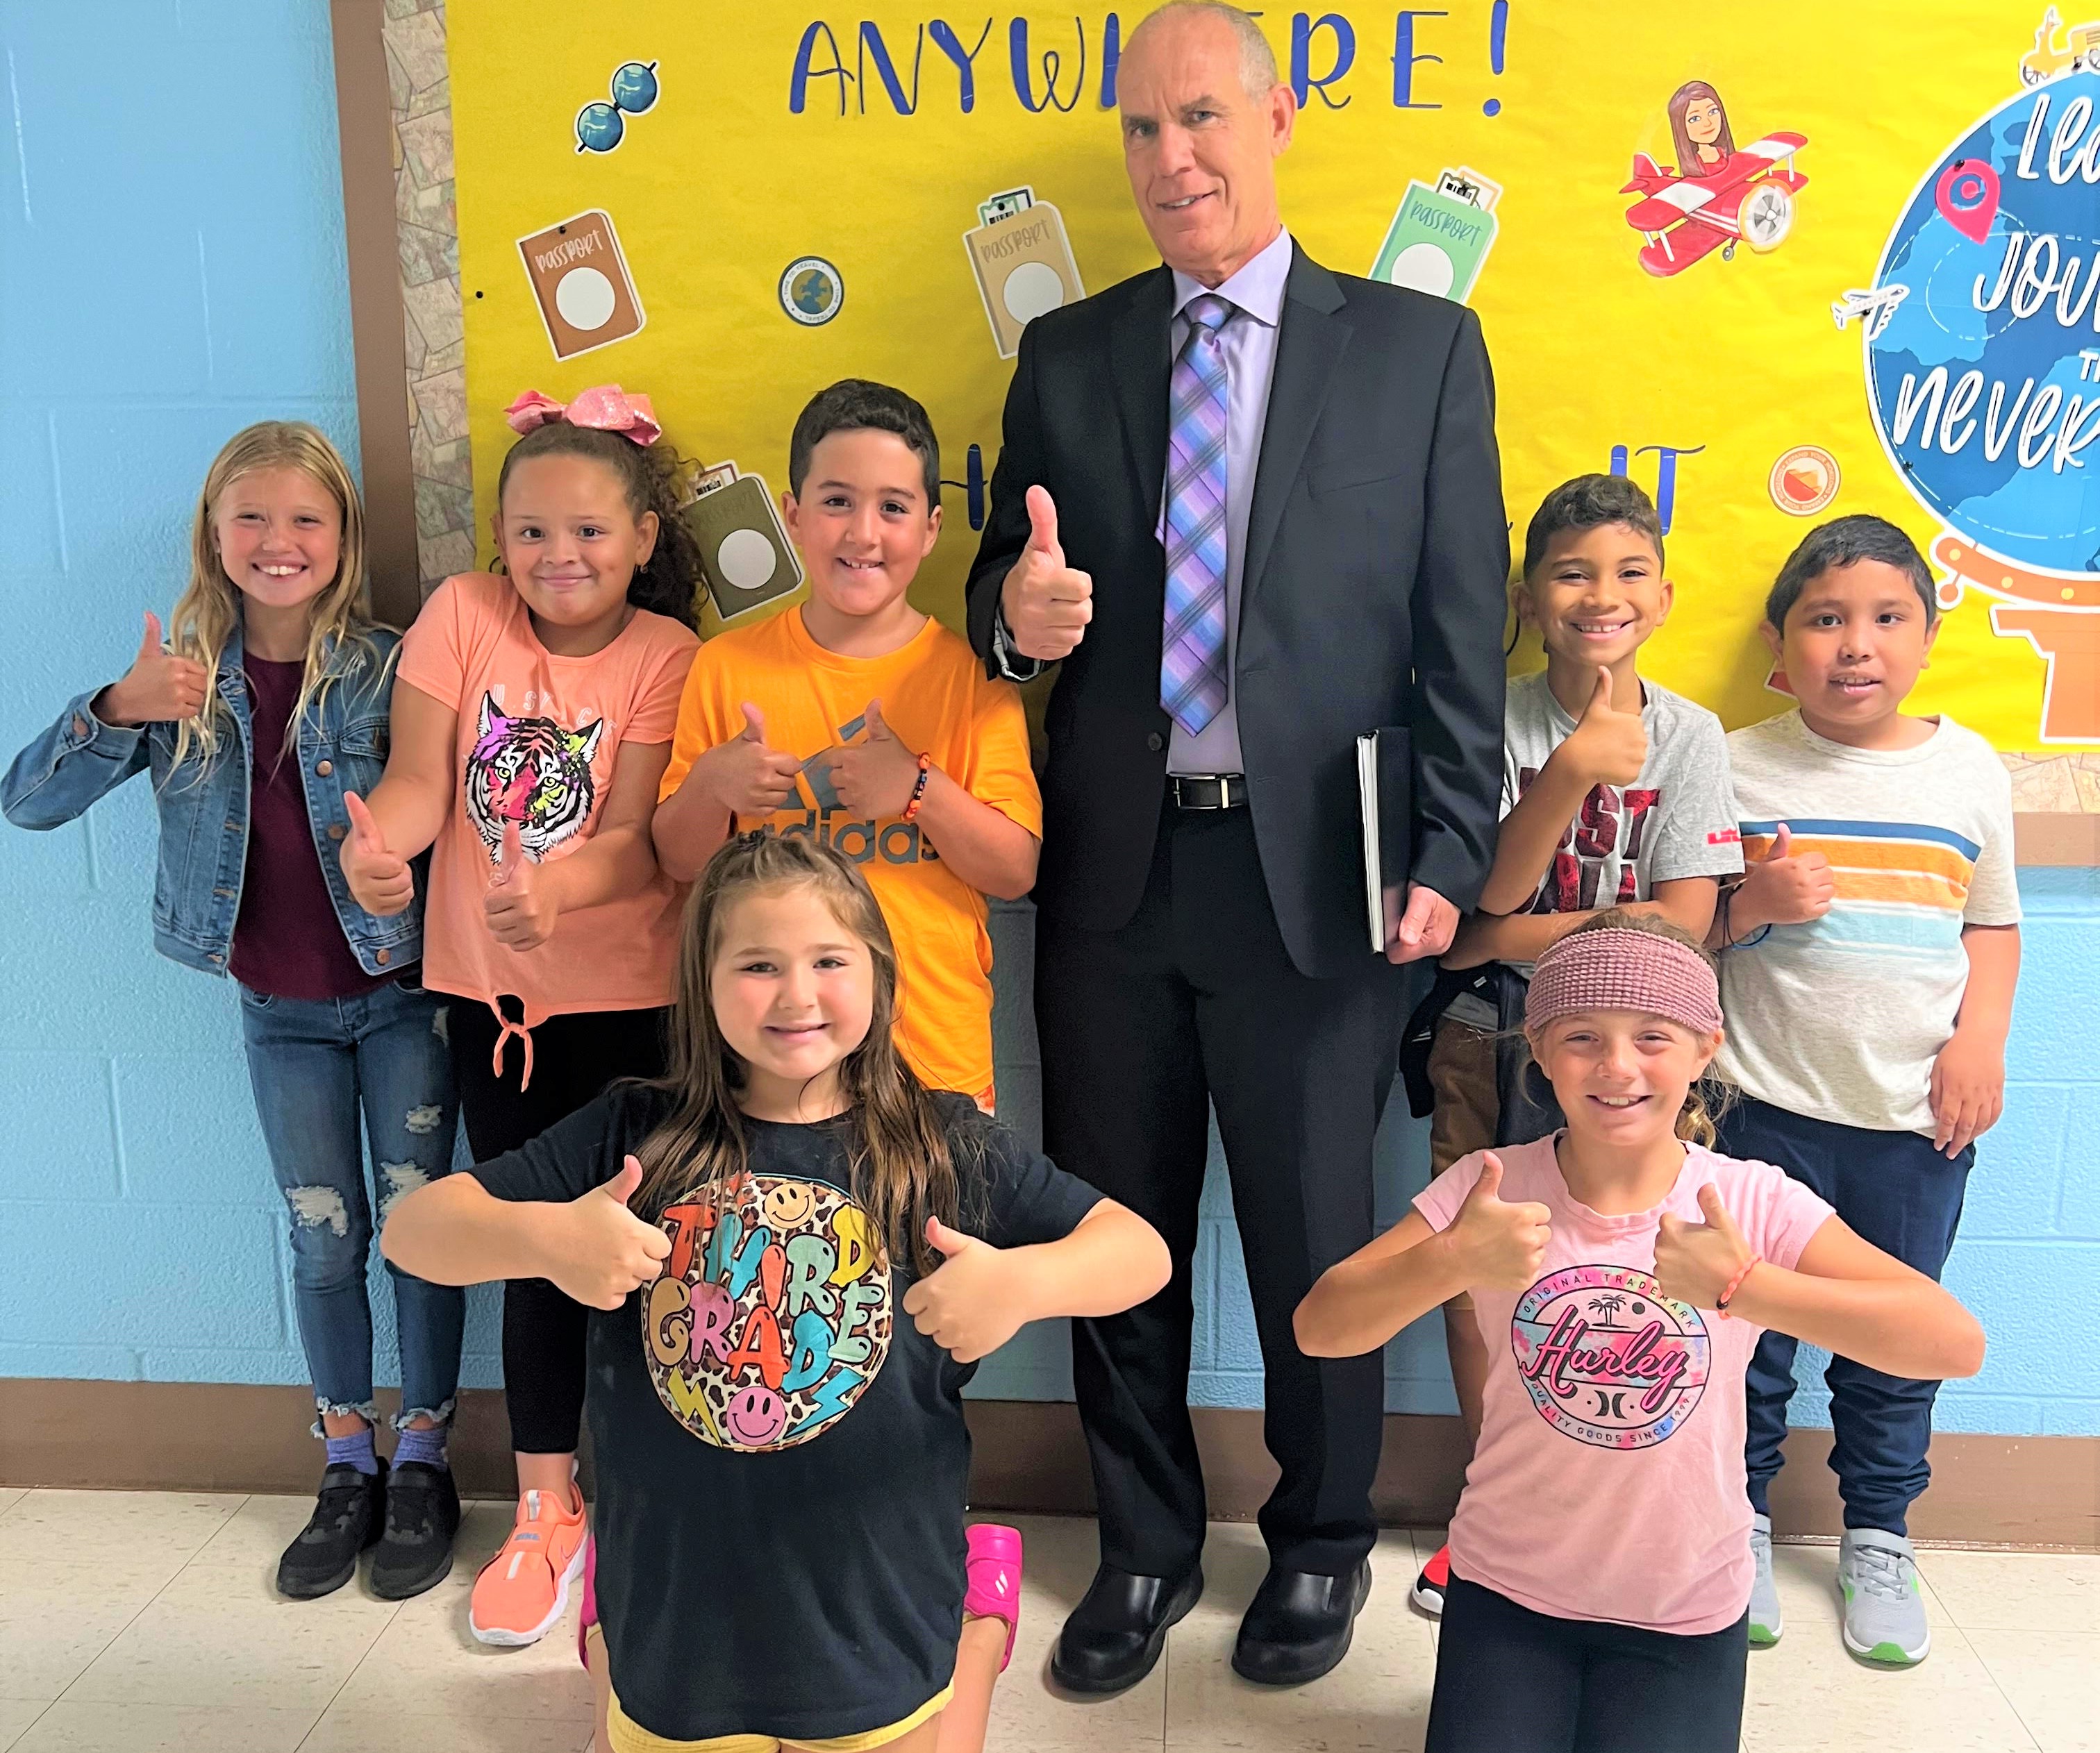 Dr. Corbett and students from Birchwood Elementary giving a thumbs up